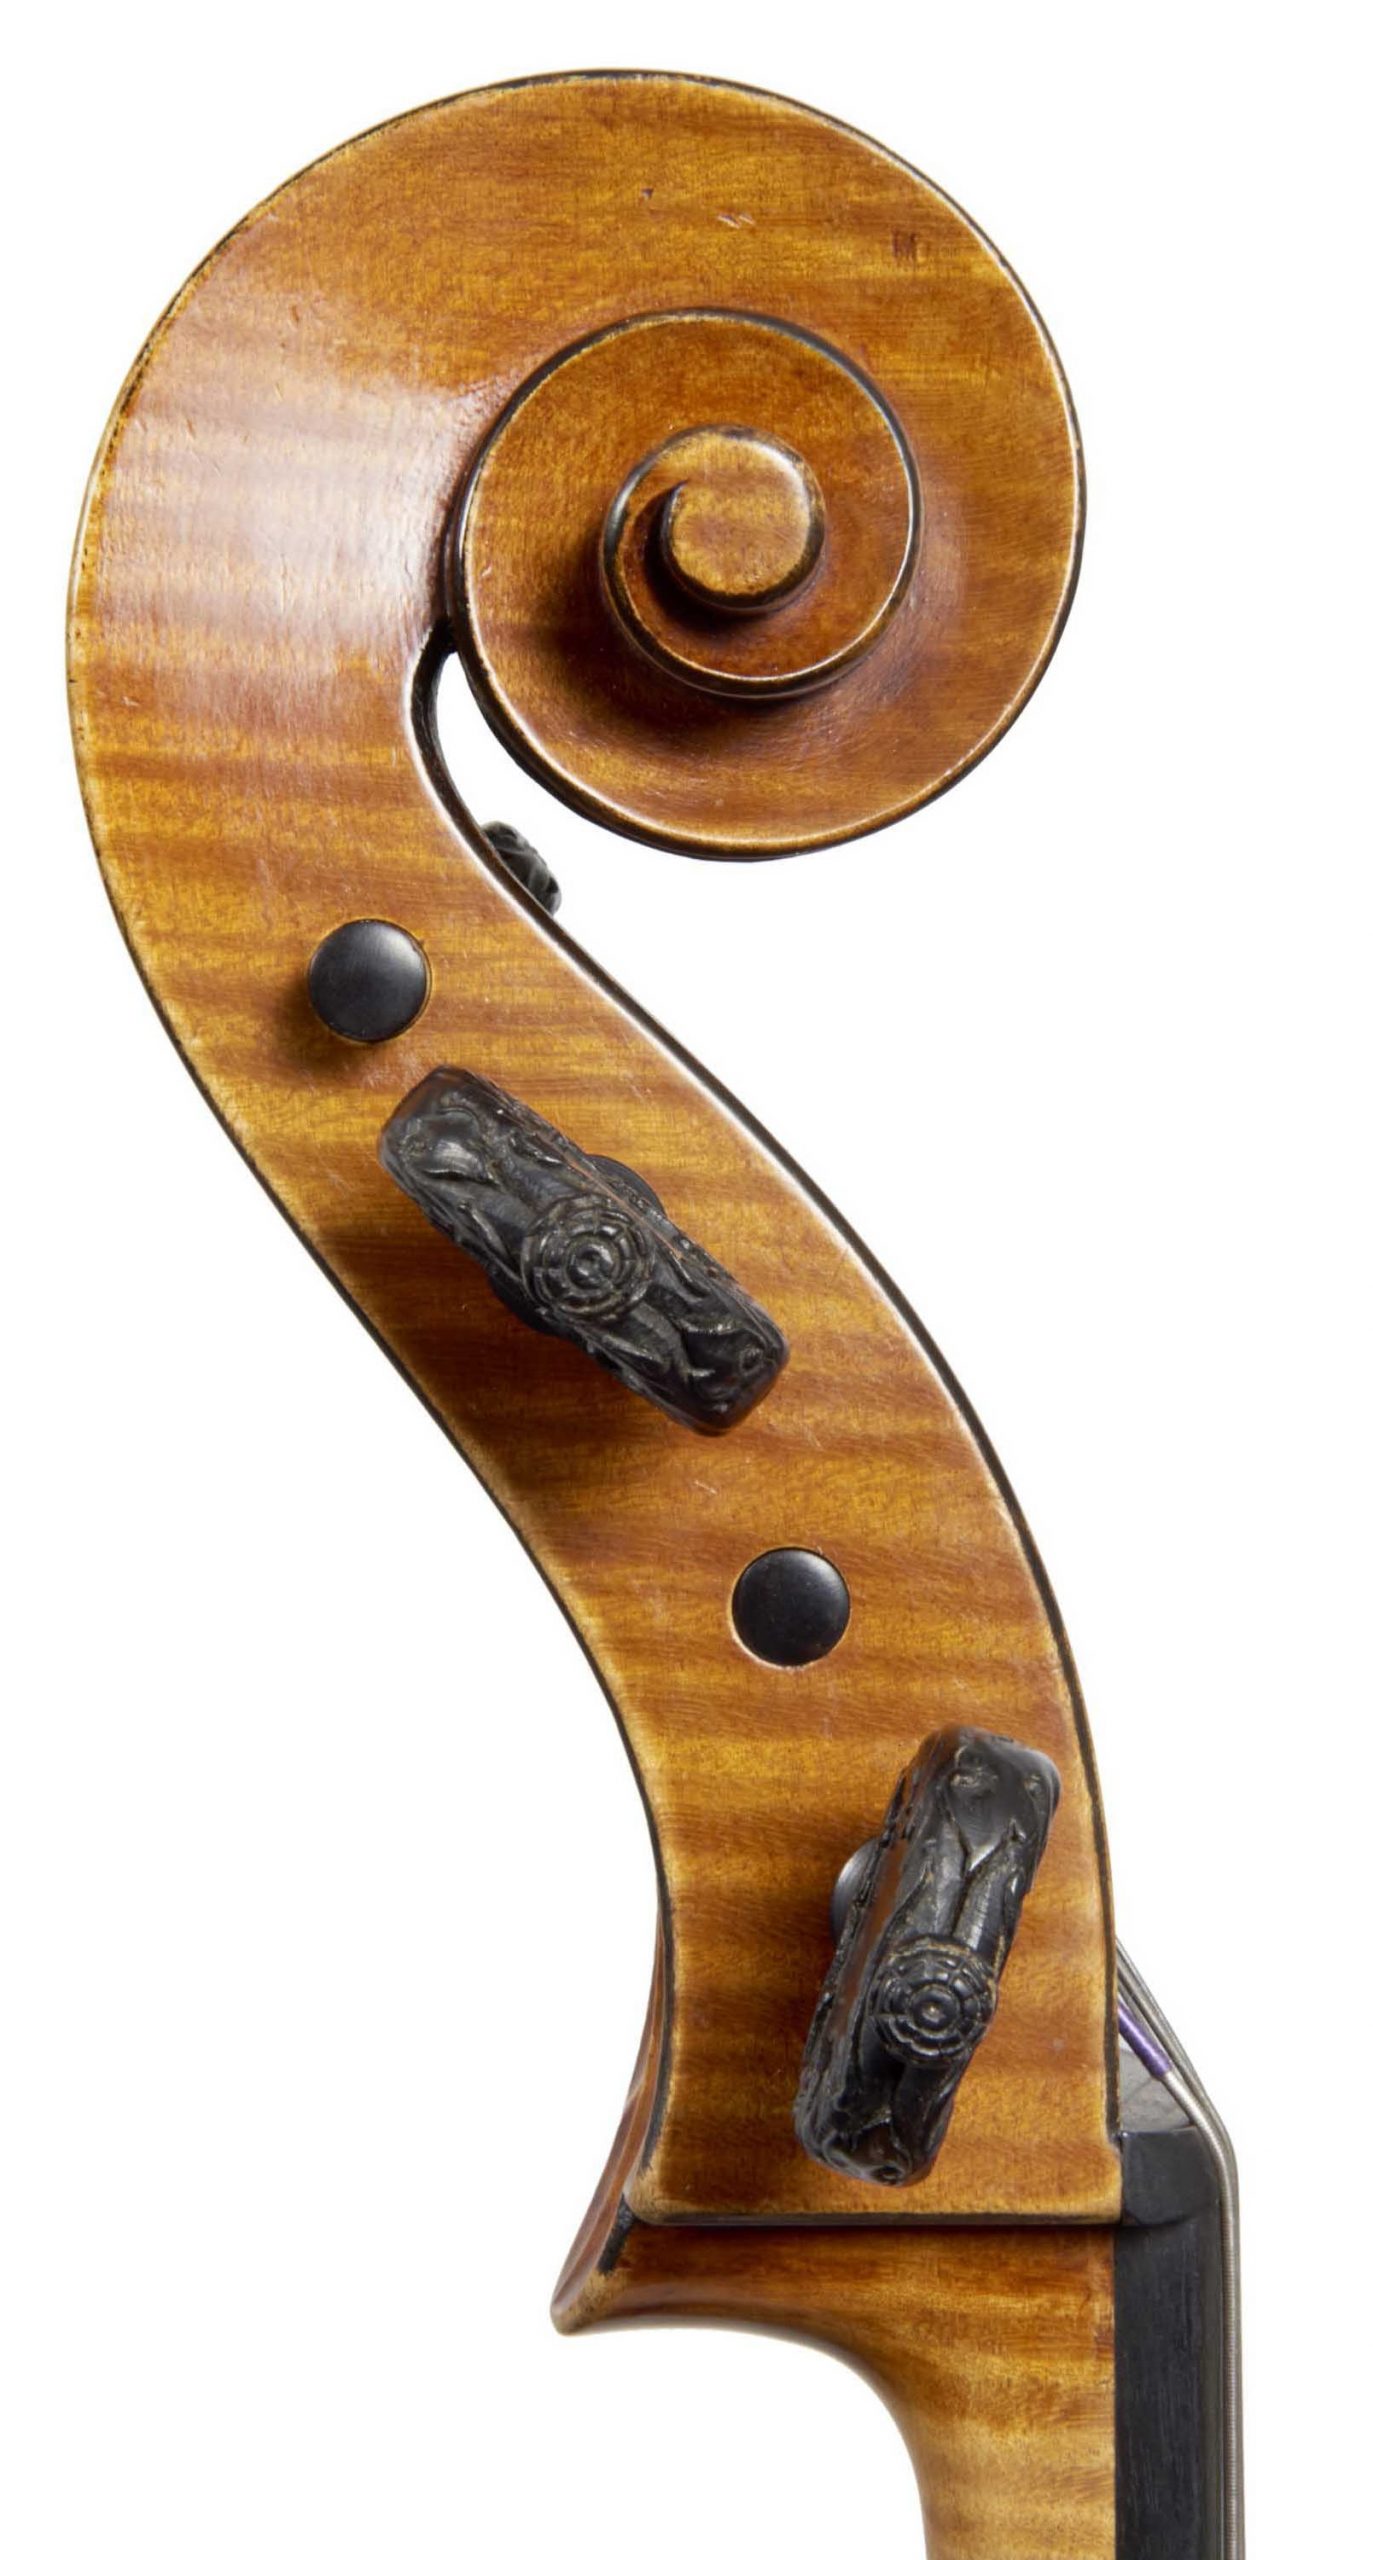 Scroll of St. Luc cello from the Evangelists quartet by JB Vuillaume, dated 1863